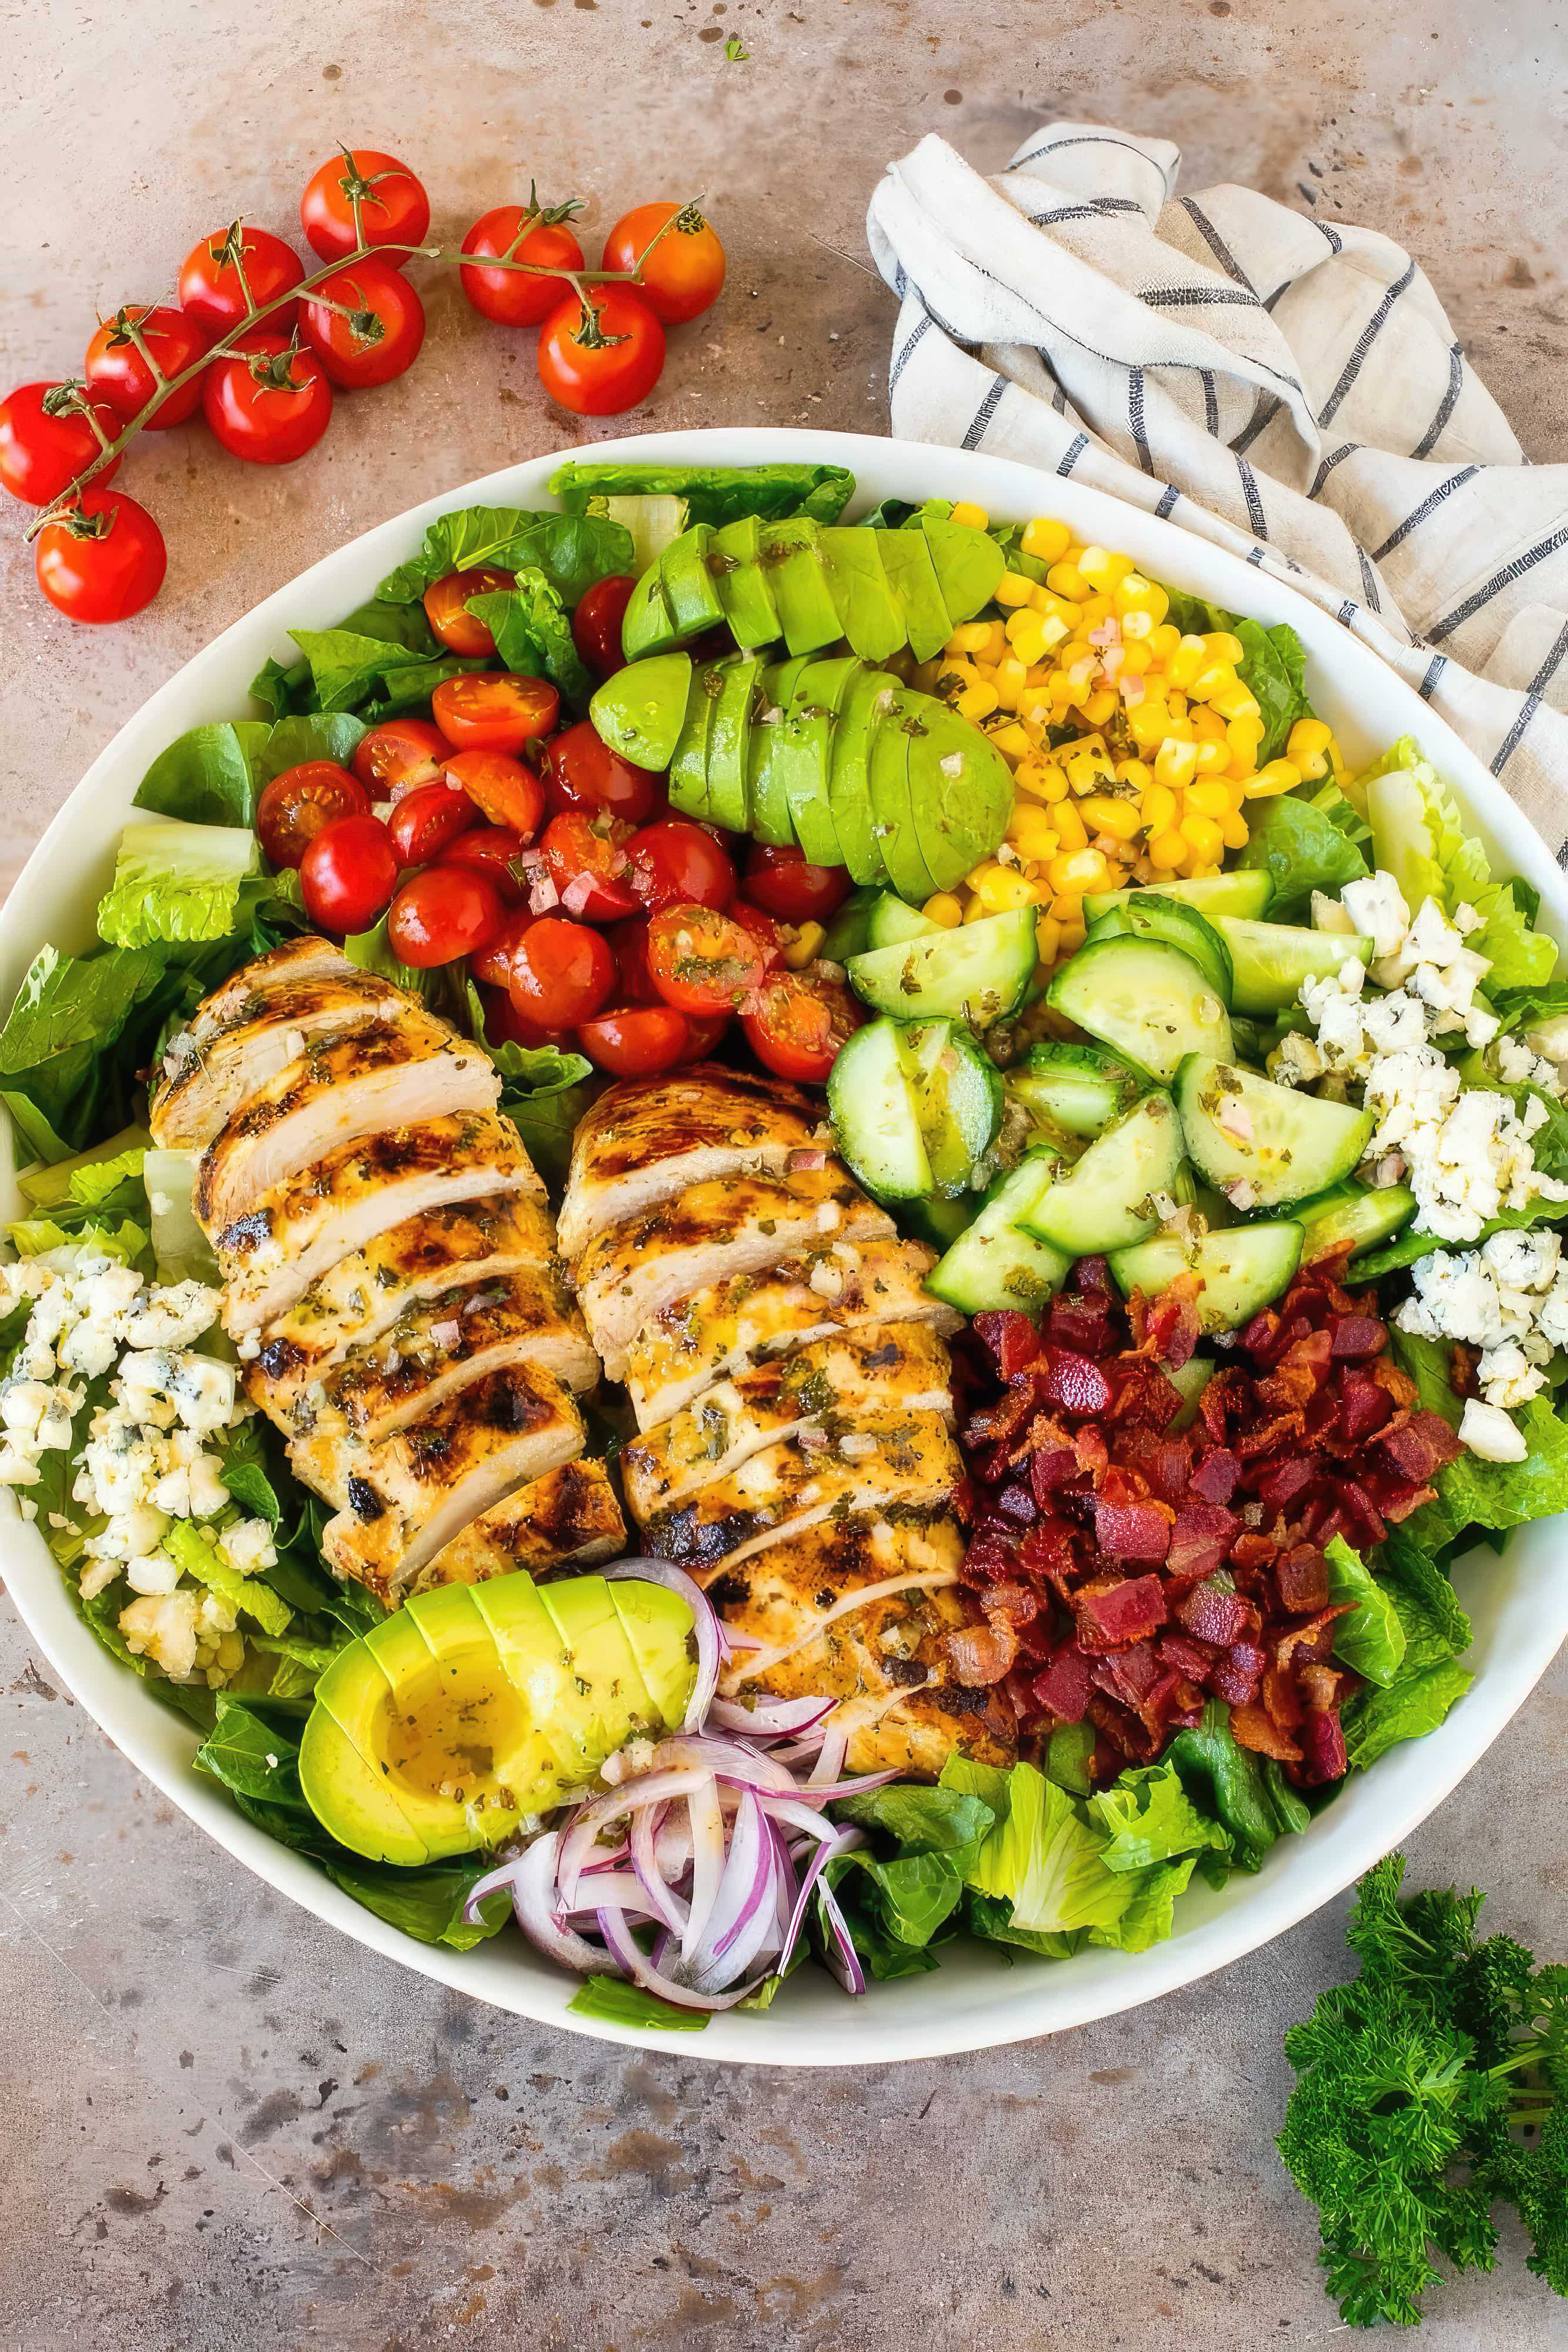 Image of grilled chicken salad